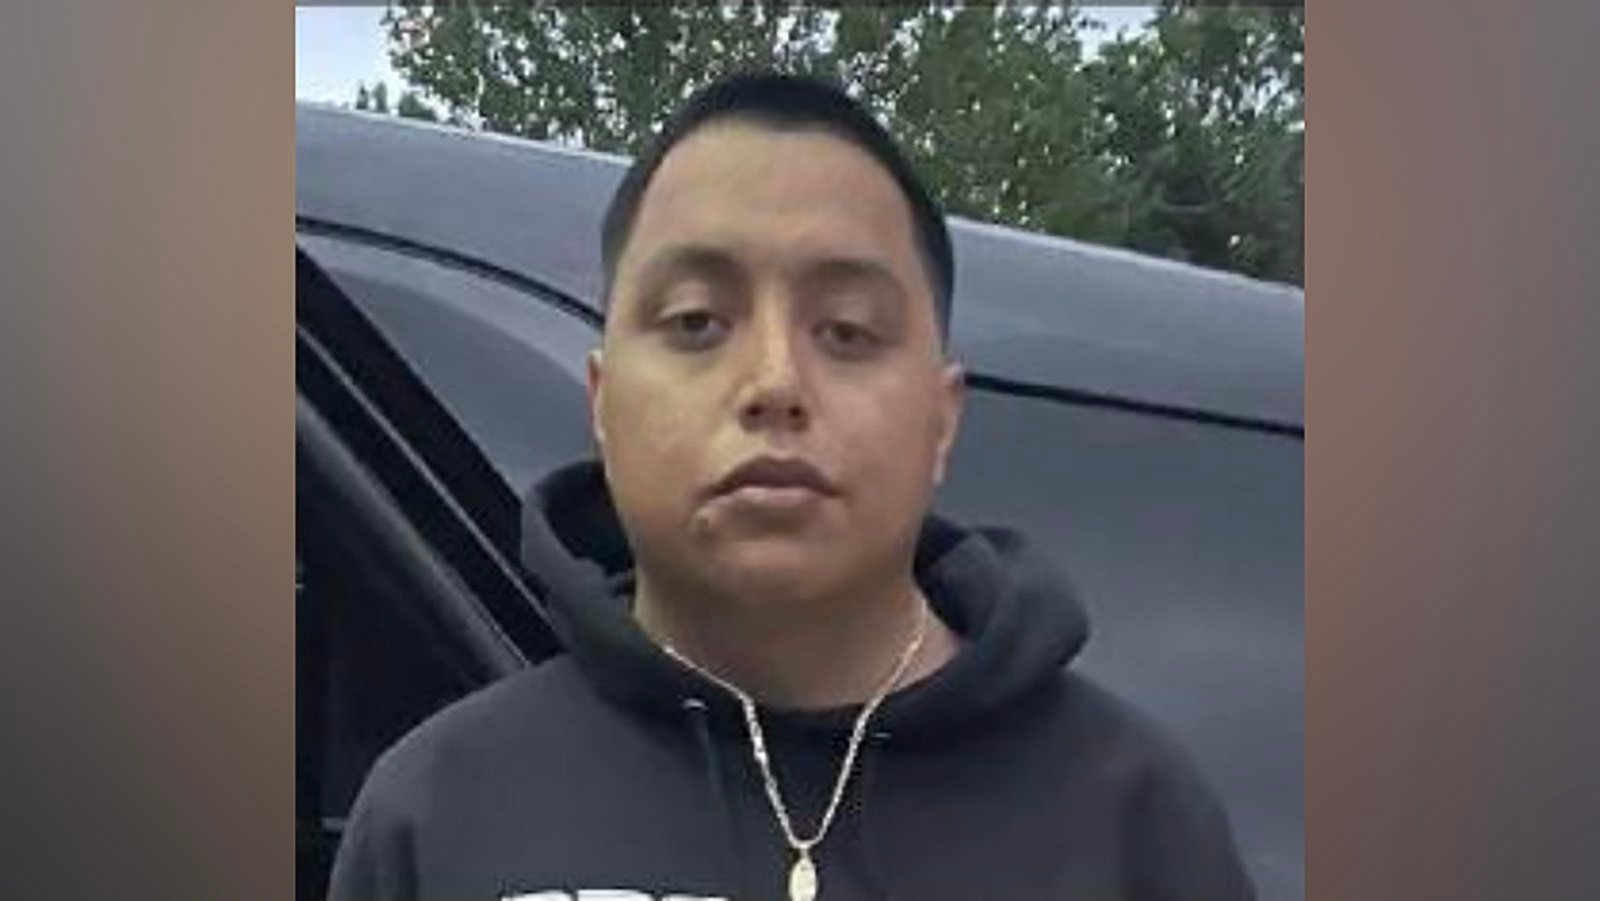 Pedro Tello Rodriguez Jr. was arrested after two Texas cheerleaders were shot Tuesday. (Elgin Police Department/Facebook)